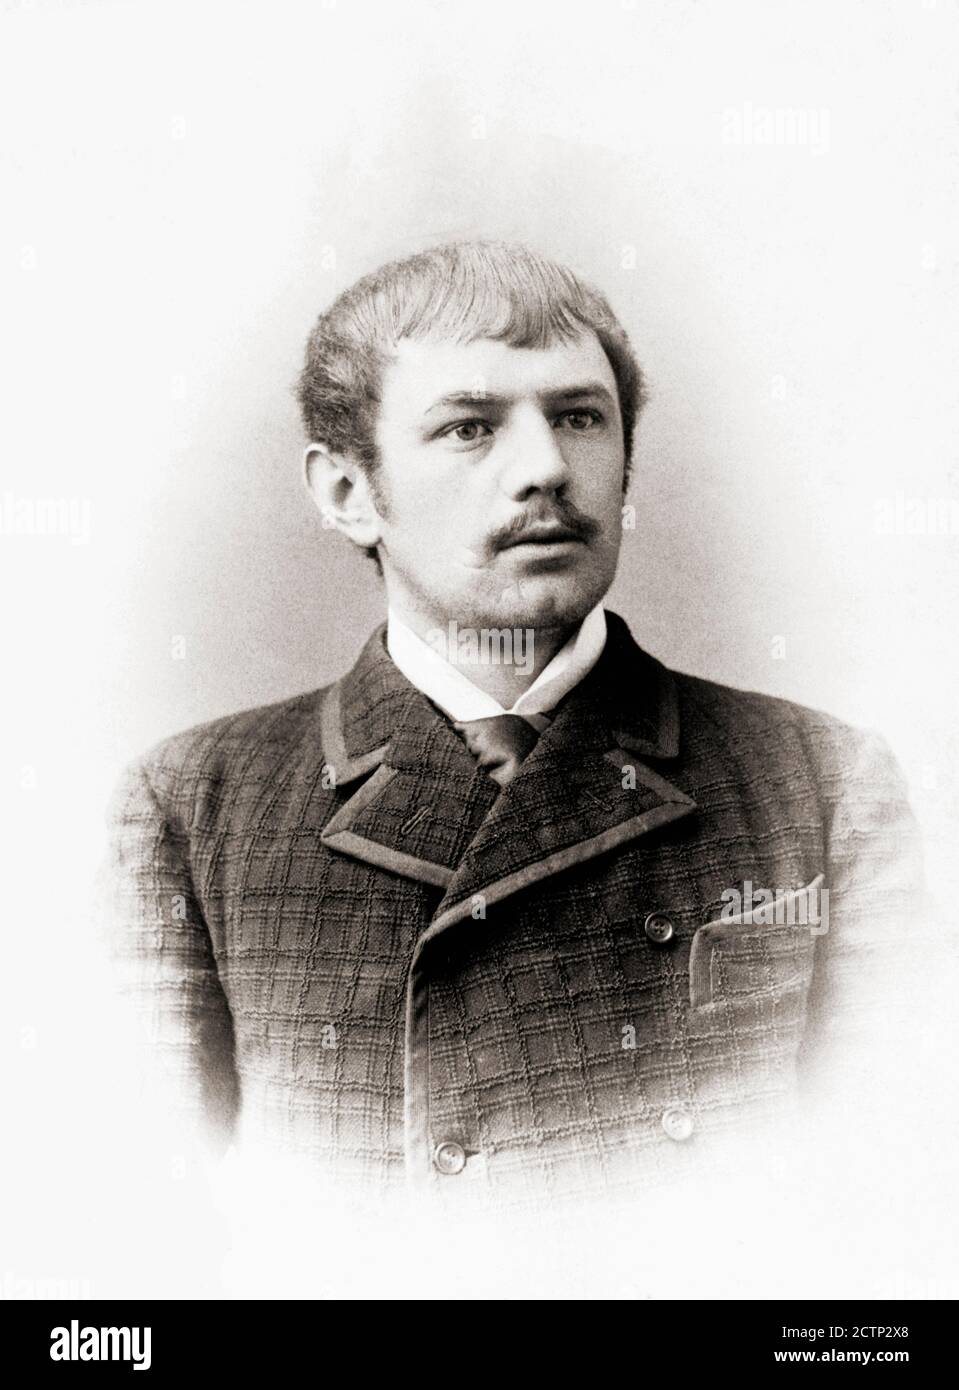 Johann Dietrich Eckart, 1868 - 1923.  Anti-Semitic German poet, author and political activist whose work and attitudes heavily influenced Adolf Hitler.  After a contemporary photograph by A. Bierl. Stock Photo